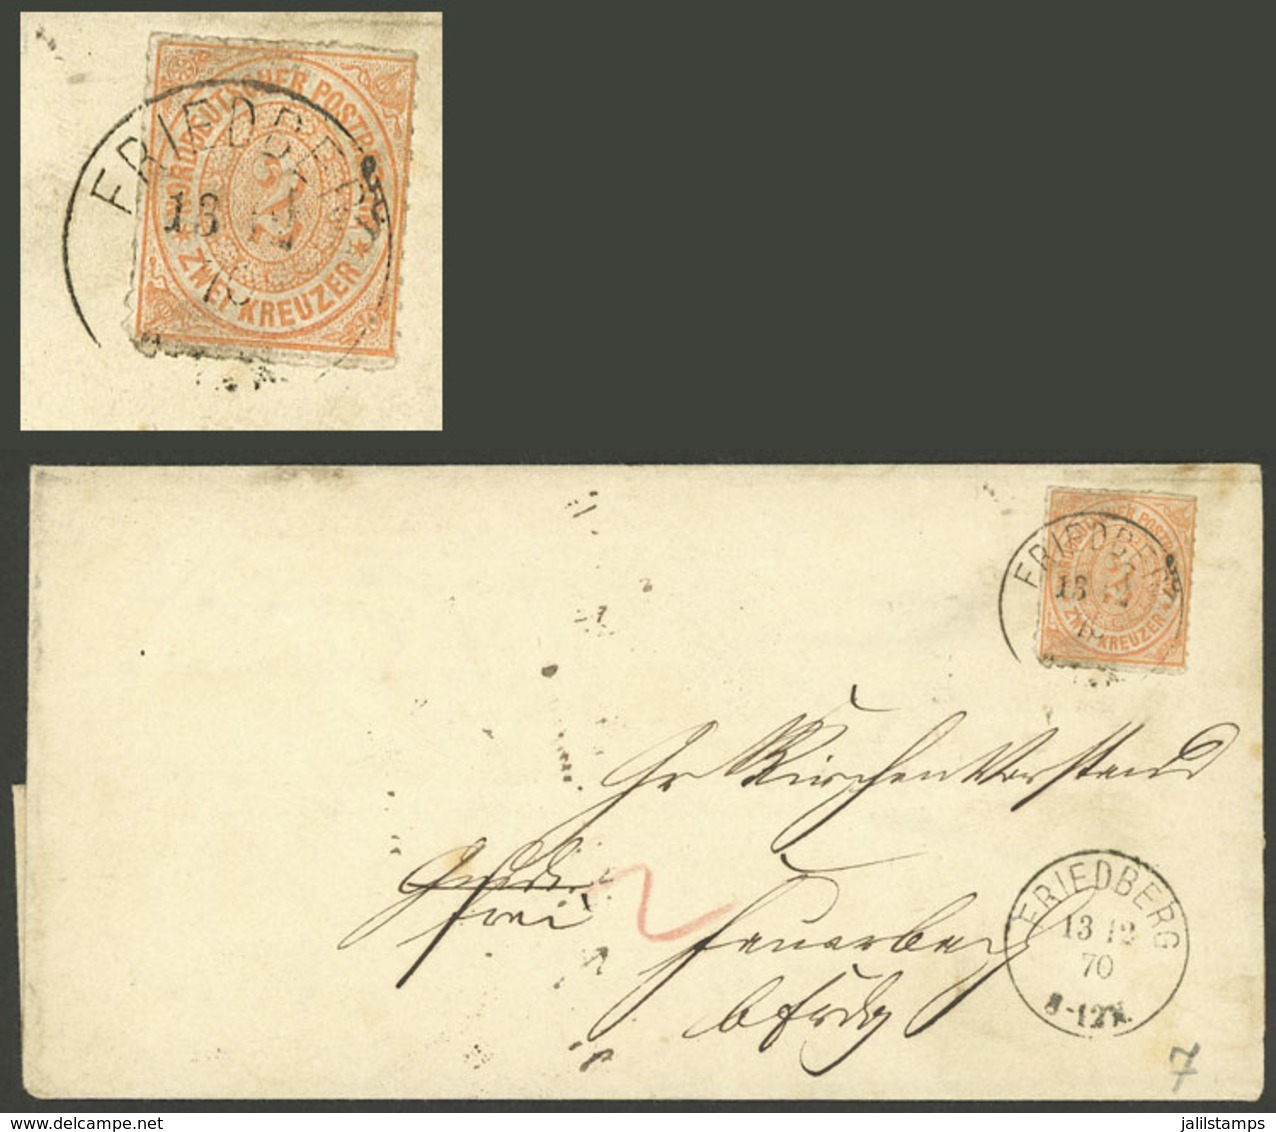 GERMANY: NORTH GERMAN CONFEDERATION: 13/DE/1870 Friedberg - ?, Folded Cover Franked By Sc.8 Alone, Very Nice! - Prephilately